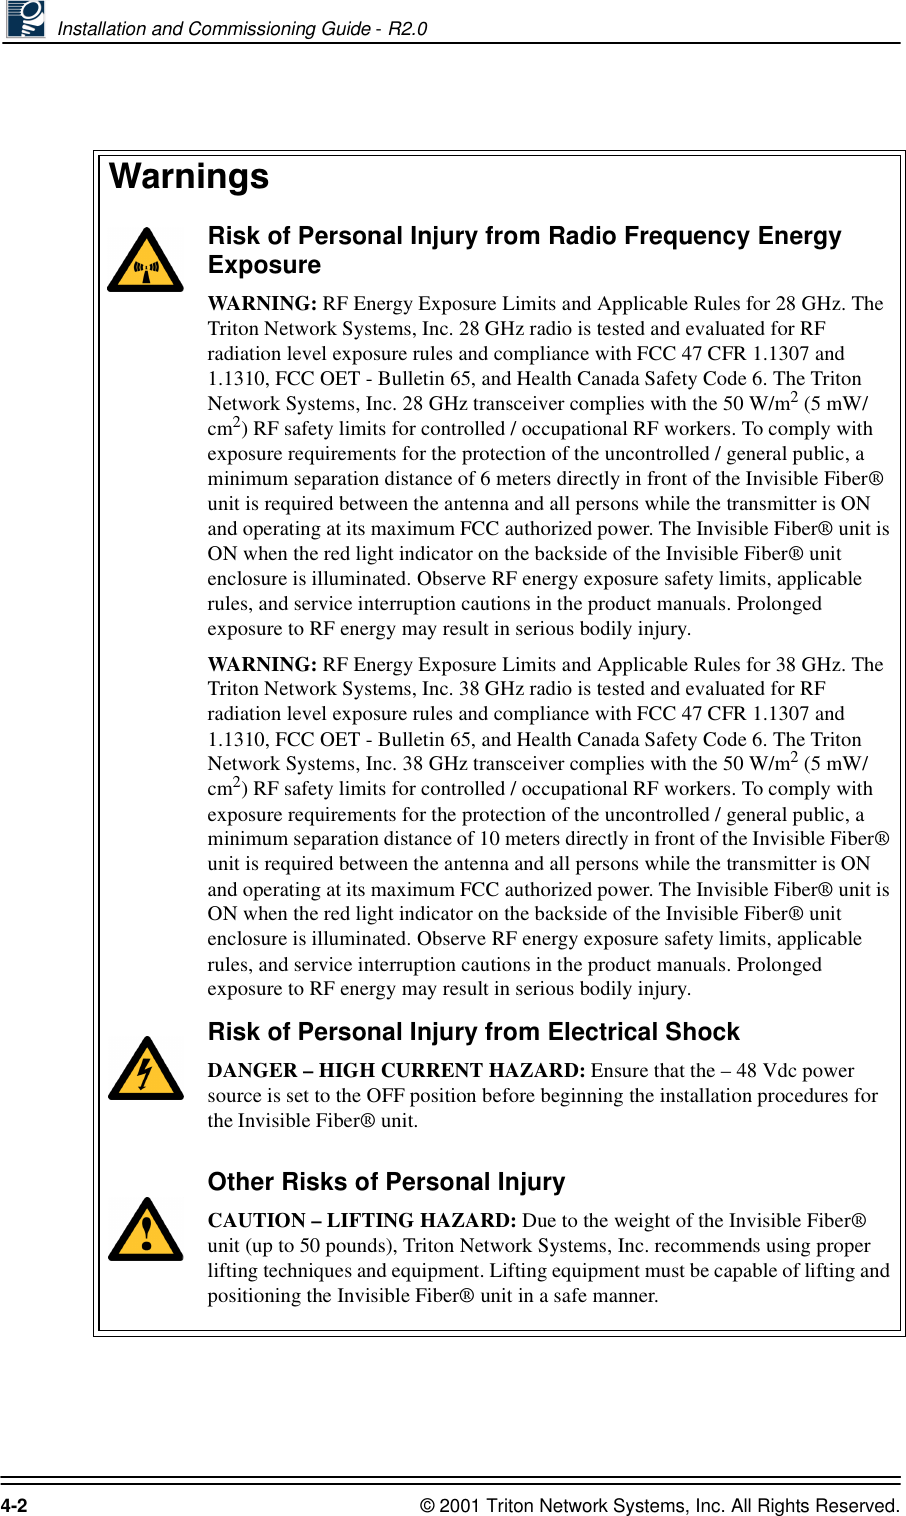  Installation and Commissioning Guide - R2.04-2 © 2001 Triton Network Systems, Inc. All Rights Reserved.:DUQLQJVRisk of Personal Injury from Radio Frequency Energy ExposureWARNING: RF Energy Exposure Limits and Applicable Rules for 28 GHz. The Triton Network Systems, Inc. 28 GHz radio is tested and evaluated for RF radiation level exposure rules and compliance with FCC 47 CFR 1.1307 and 1.1310, FCC OET - Bulletin 65, and Health Canada Safety Code 6. The Triton Network Systems, Inc. 28 GHz transceiver complies with the 50 W/m2 (5 mW/cm2) RF safety limits for controlled / occupational RF workers. To comply with exposure requirements for the protection of the uncontrolled / general public, a minimum separation distance of 6 meters directly in front of the Invisible Fiber® unit is required between the antenna and all persons while the transmitter is ON and operating at its maximum FCC authorized power. The Invisible Fiber® unit is ON when the red light indicator on the backside of the Invisible Fiber® unit enclosure is illuminated. Observe RF energy exposure safety limits, applicable rules, and service interruption cautions in the product manuals. Prolonged exposure to RF energy may result in serious bodily injury.WARNING: RF Energy Exposure Limits and Applicable Rules for 38 GHz. The Triton Network Systems, Inc. 38 GHz radio is tested and evaluated for RF radiation level exposure rules and compliance with FCC 47 CFR 1.1307 and 1.1310, FCC OET - Bulletin 65, and Health Canada Safety Code 6. The Triton Network Systems, Inc. 38 GHz transceiver complies with the 50 W/m2 (5 mW/cm2) RF safety limits for controlled / occupational RF workers. To comply with exposure requirements for the protection of the uncontrolled / general public, a minimum separation distance of 10 meters directly in front of the Invisible Fiber® unit is required between the antenna and all persons while the transmitter is ON and operating at its maximum FCC authorized power. The Invisible Fiber® unit is ON when the red light indicator on the backside of the Invisible Fiber® unit enclosure is illuminated. Observe RF energy exposure safety limits, applicable rules, and service interruption cautions in the product manuals. Prolonged exposure to RF energy may result in serious bodily injury.Risk of Personal Injury from Electrical ShockDANGER – HIGH CURRENT HAZARD: Ensure that the – 48 Vdc power source is set to the OFF position before beginning the installation procedures for the Invisible Fiber® unit. Other Risks of Personal InjuryCAUTION – LIFTING HAZARD: Due to the weight of the Invisible Fiber® unit (up to 50 pounds), Triton Network Systems, Inc. recommends using proper lifting techniques and equipment. Lifting equipment must be capable of lifting and positioning the Invisible Fiber® unit in a safe manner.